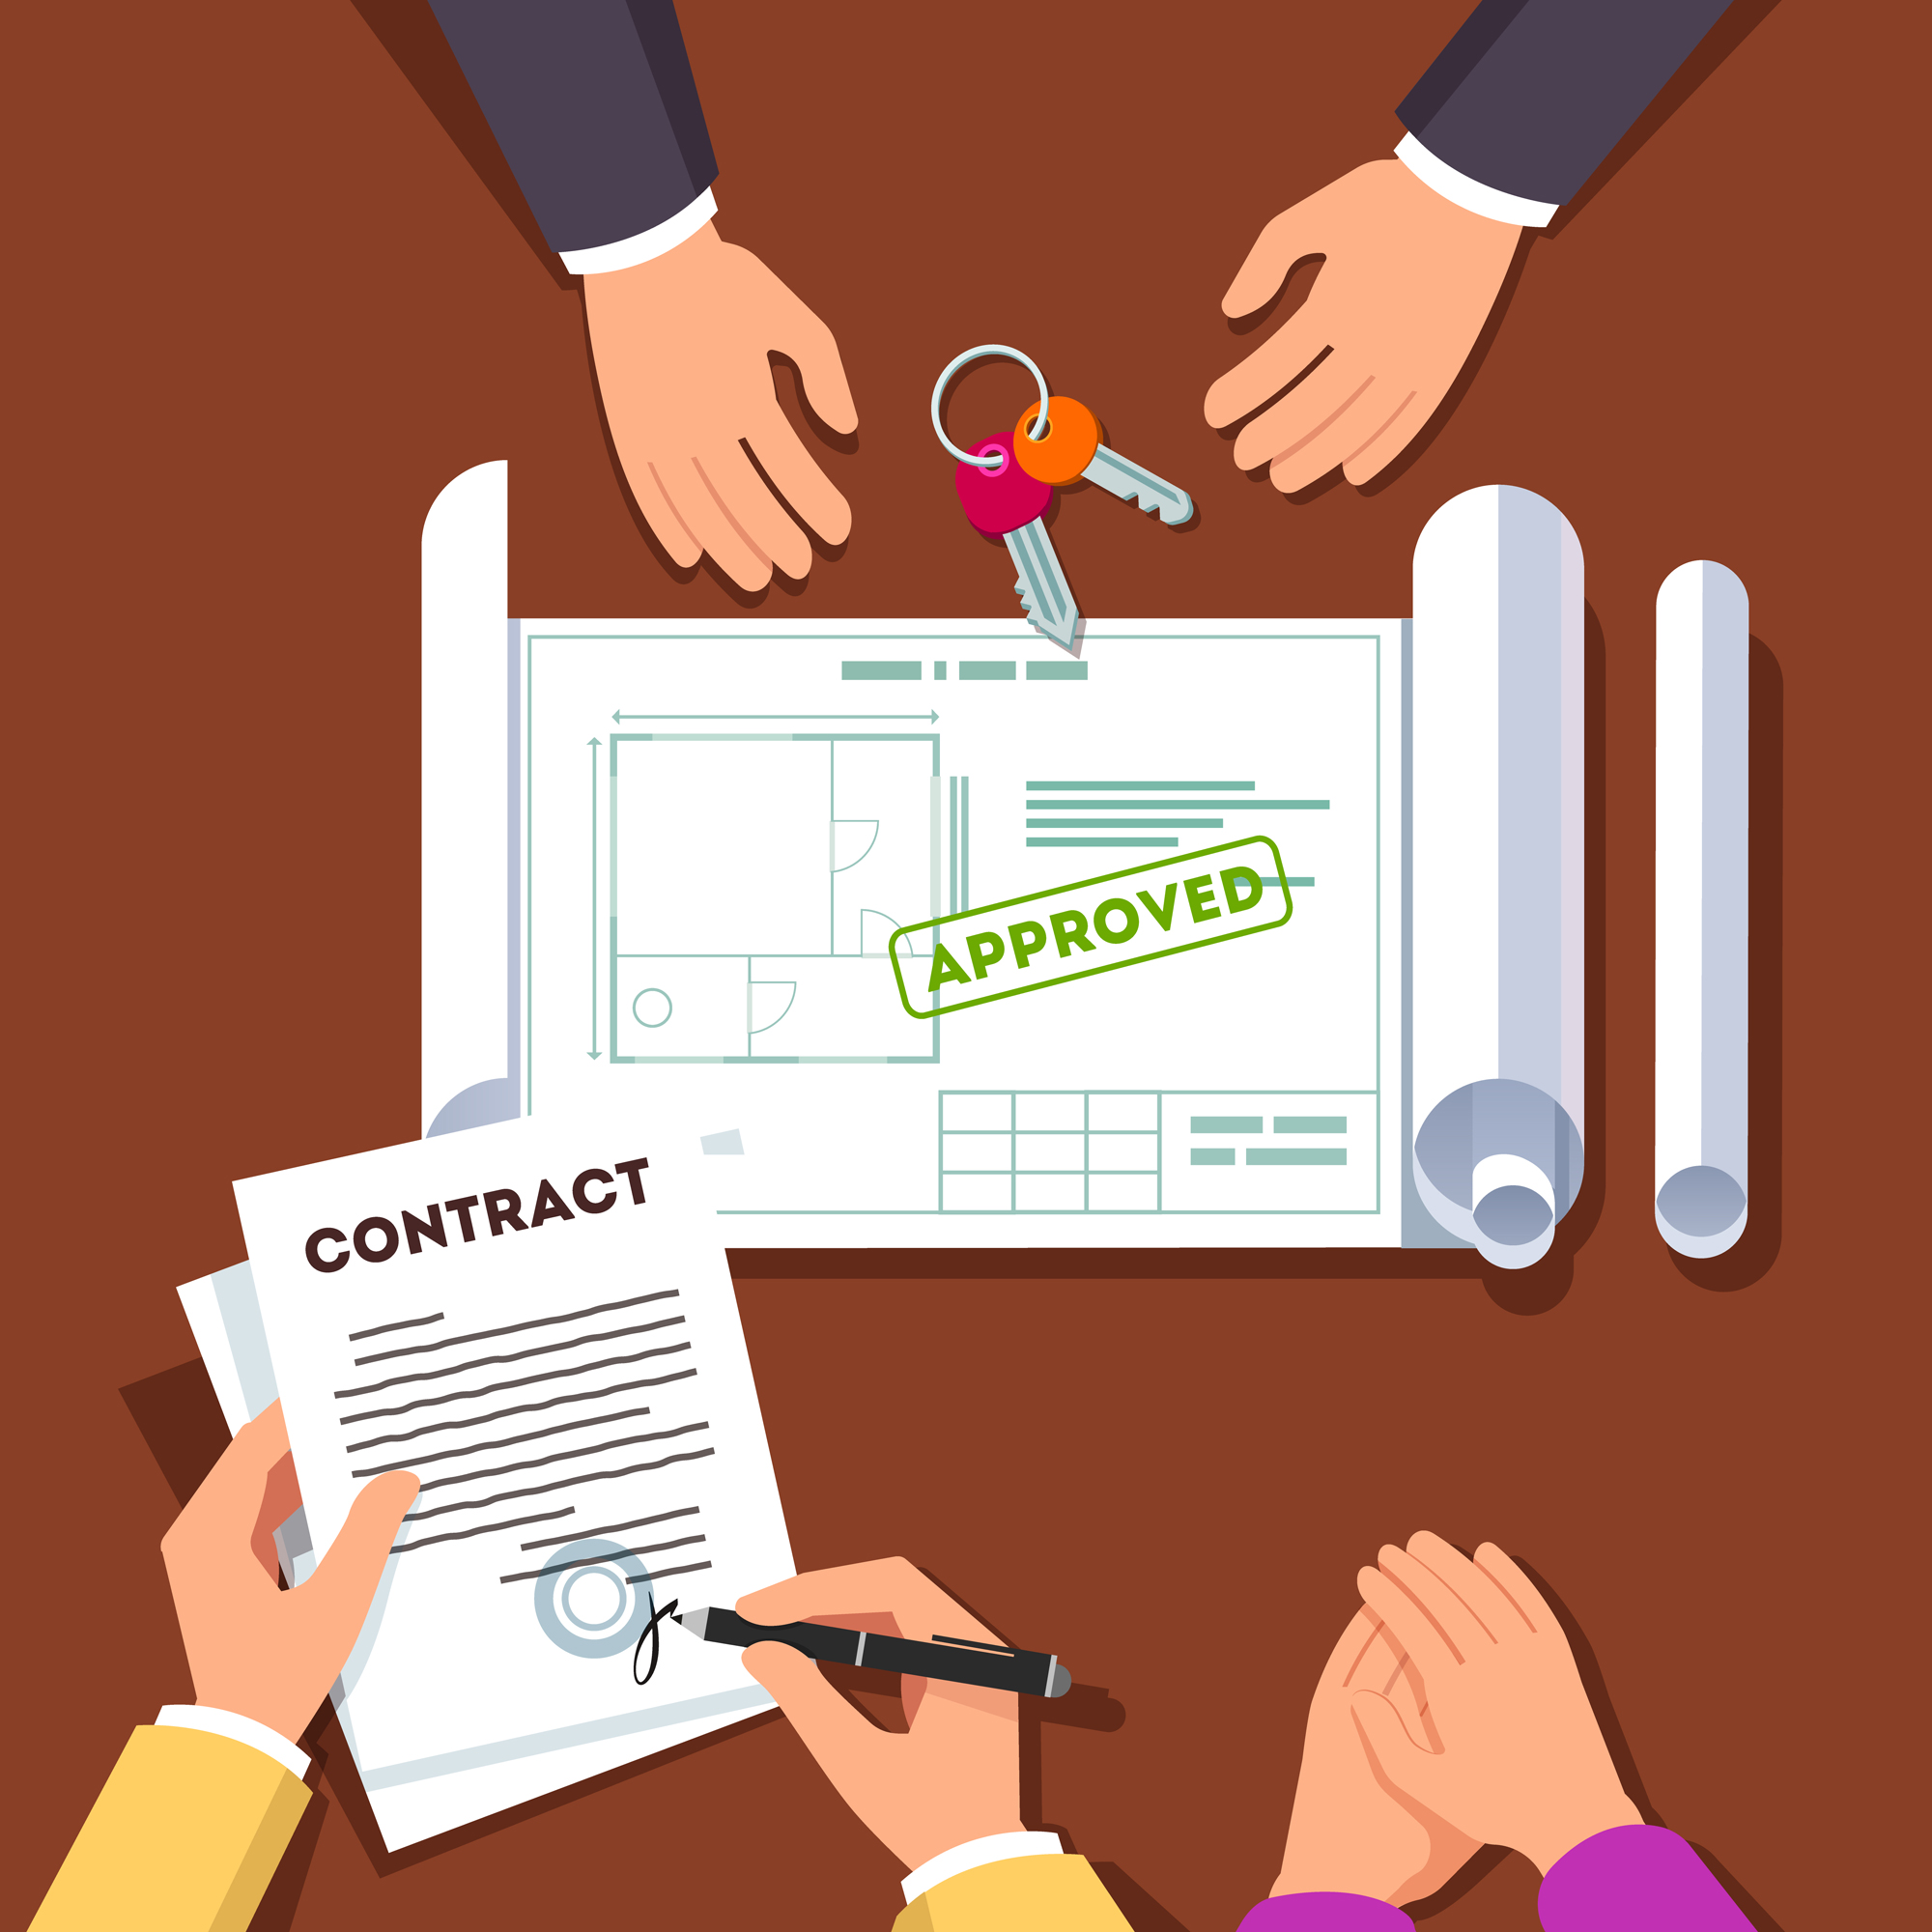 Understanding the sale of approval contract